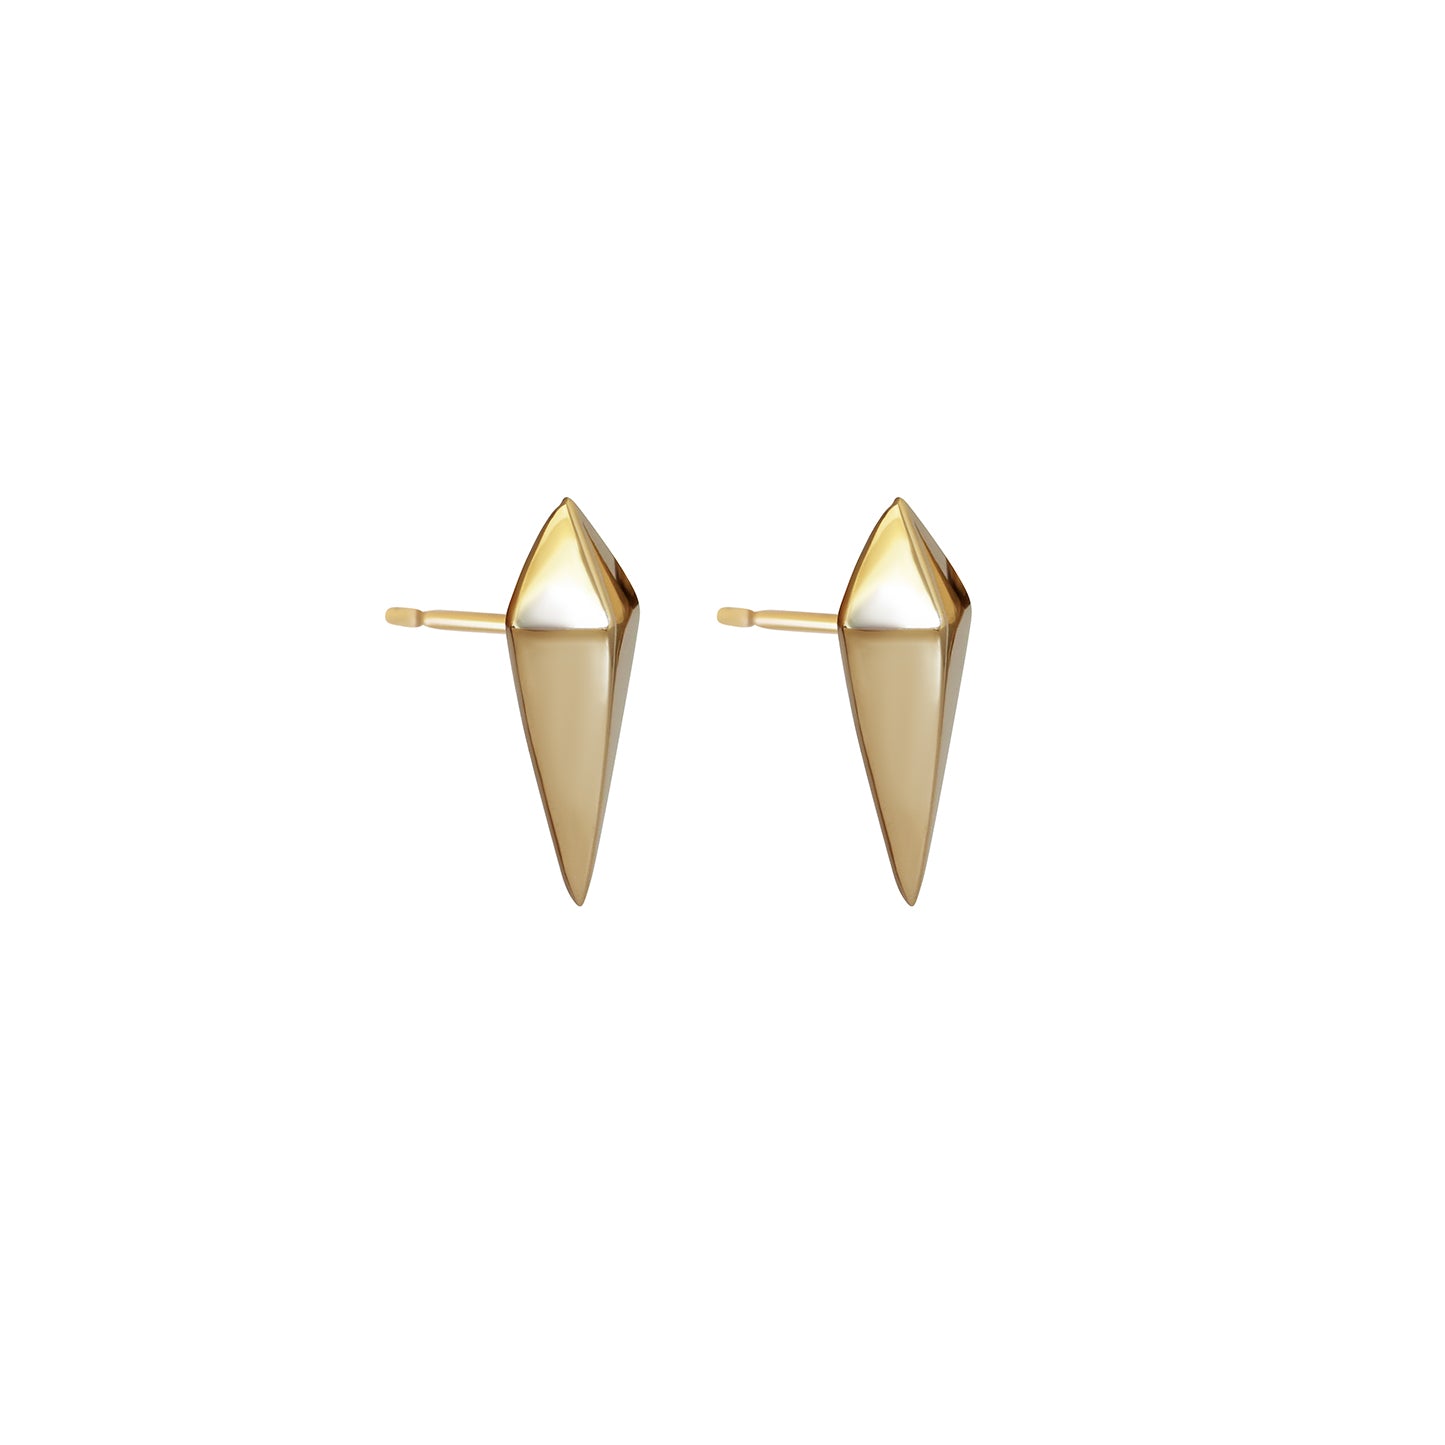 Spiked Stud / Yellow Gold - Goldpoint Studio - Greenpoint, Brooklyn - Fine Jewelry